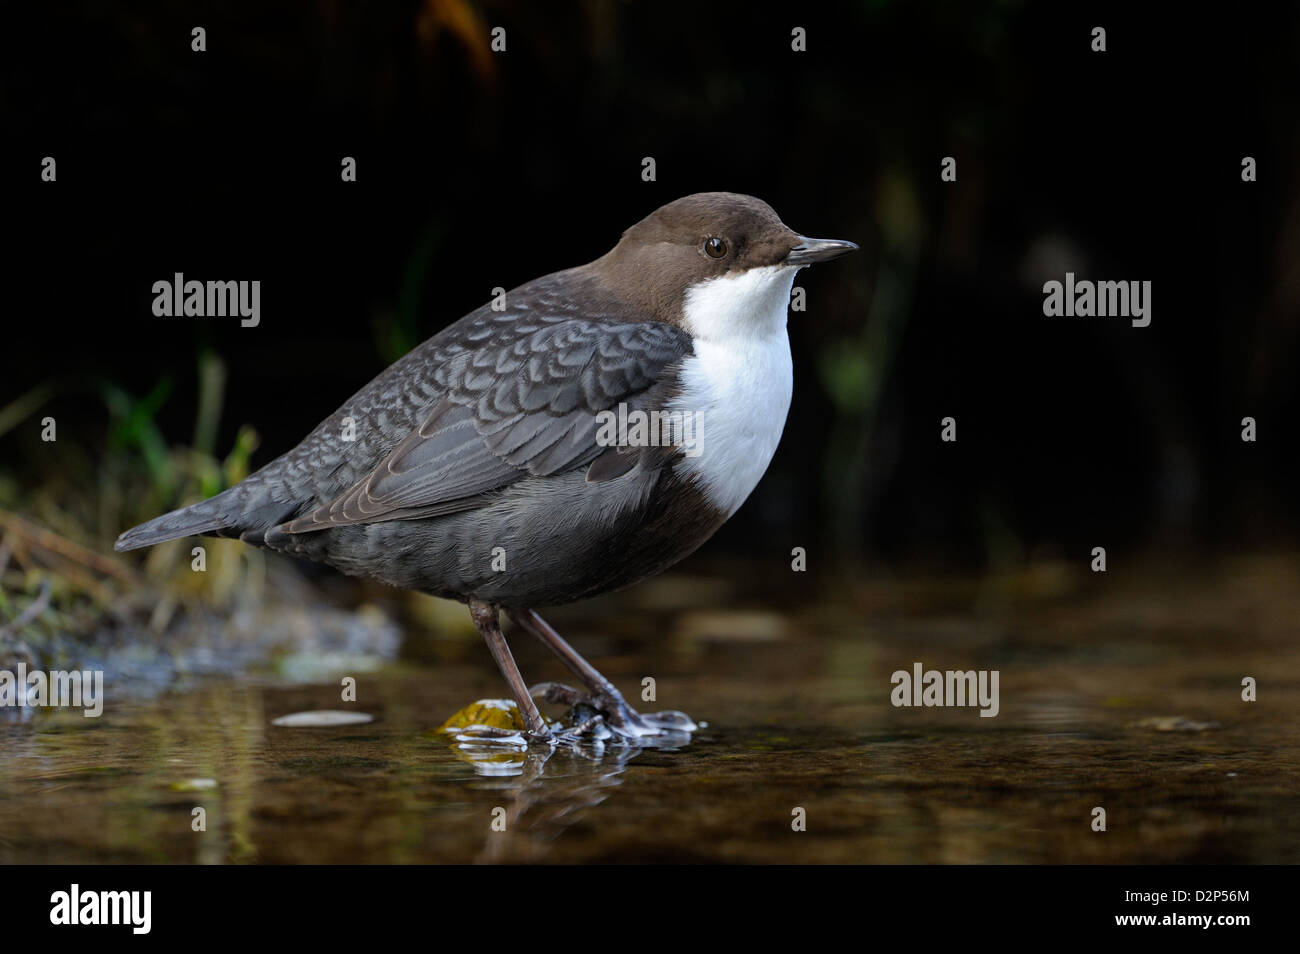 Dipper standing in water. Stock Photo